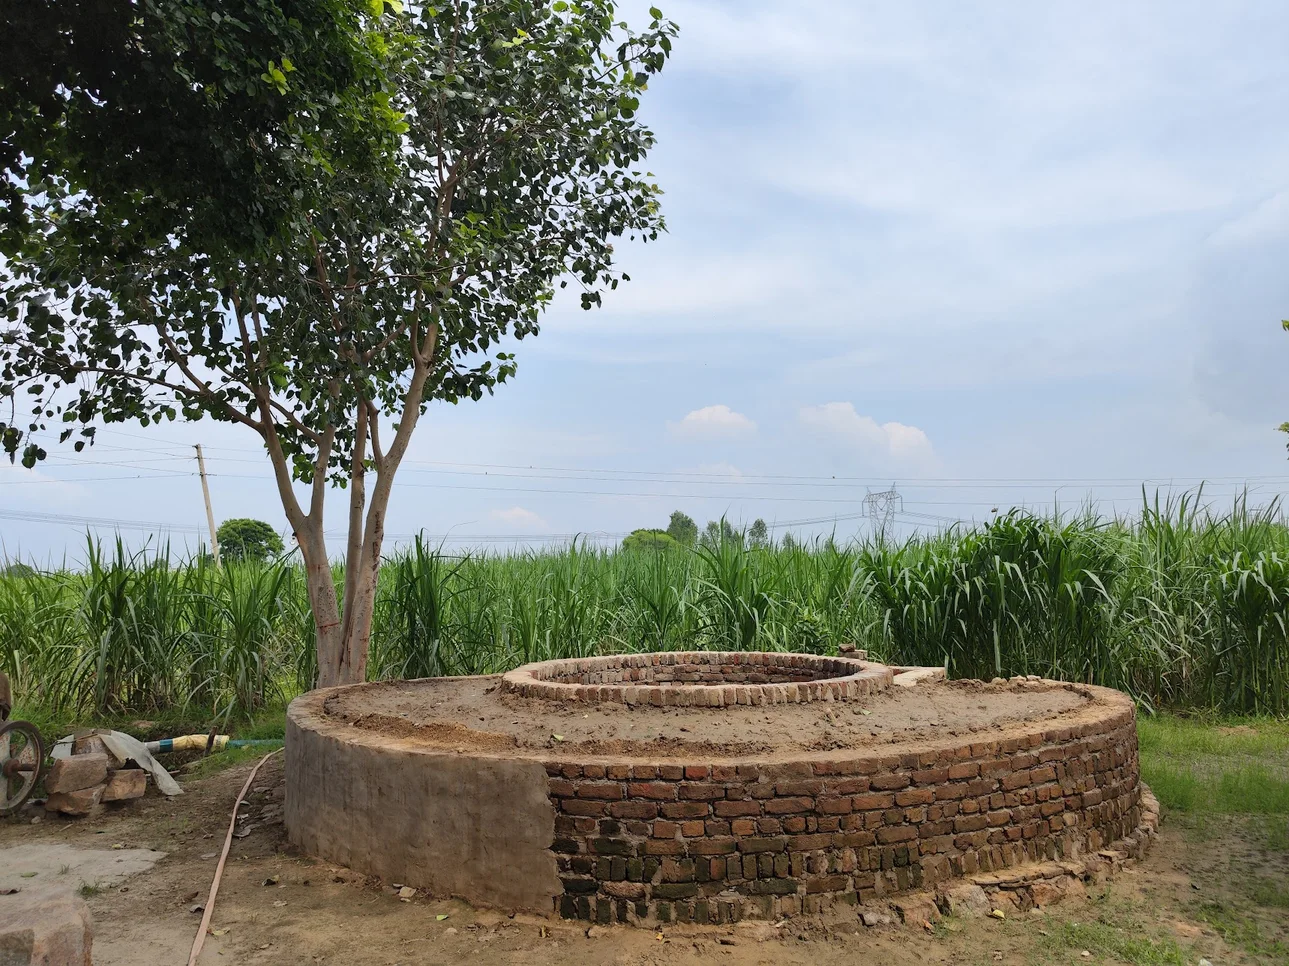 A water well in front of a tree and a field.